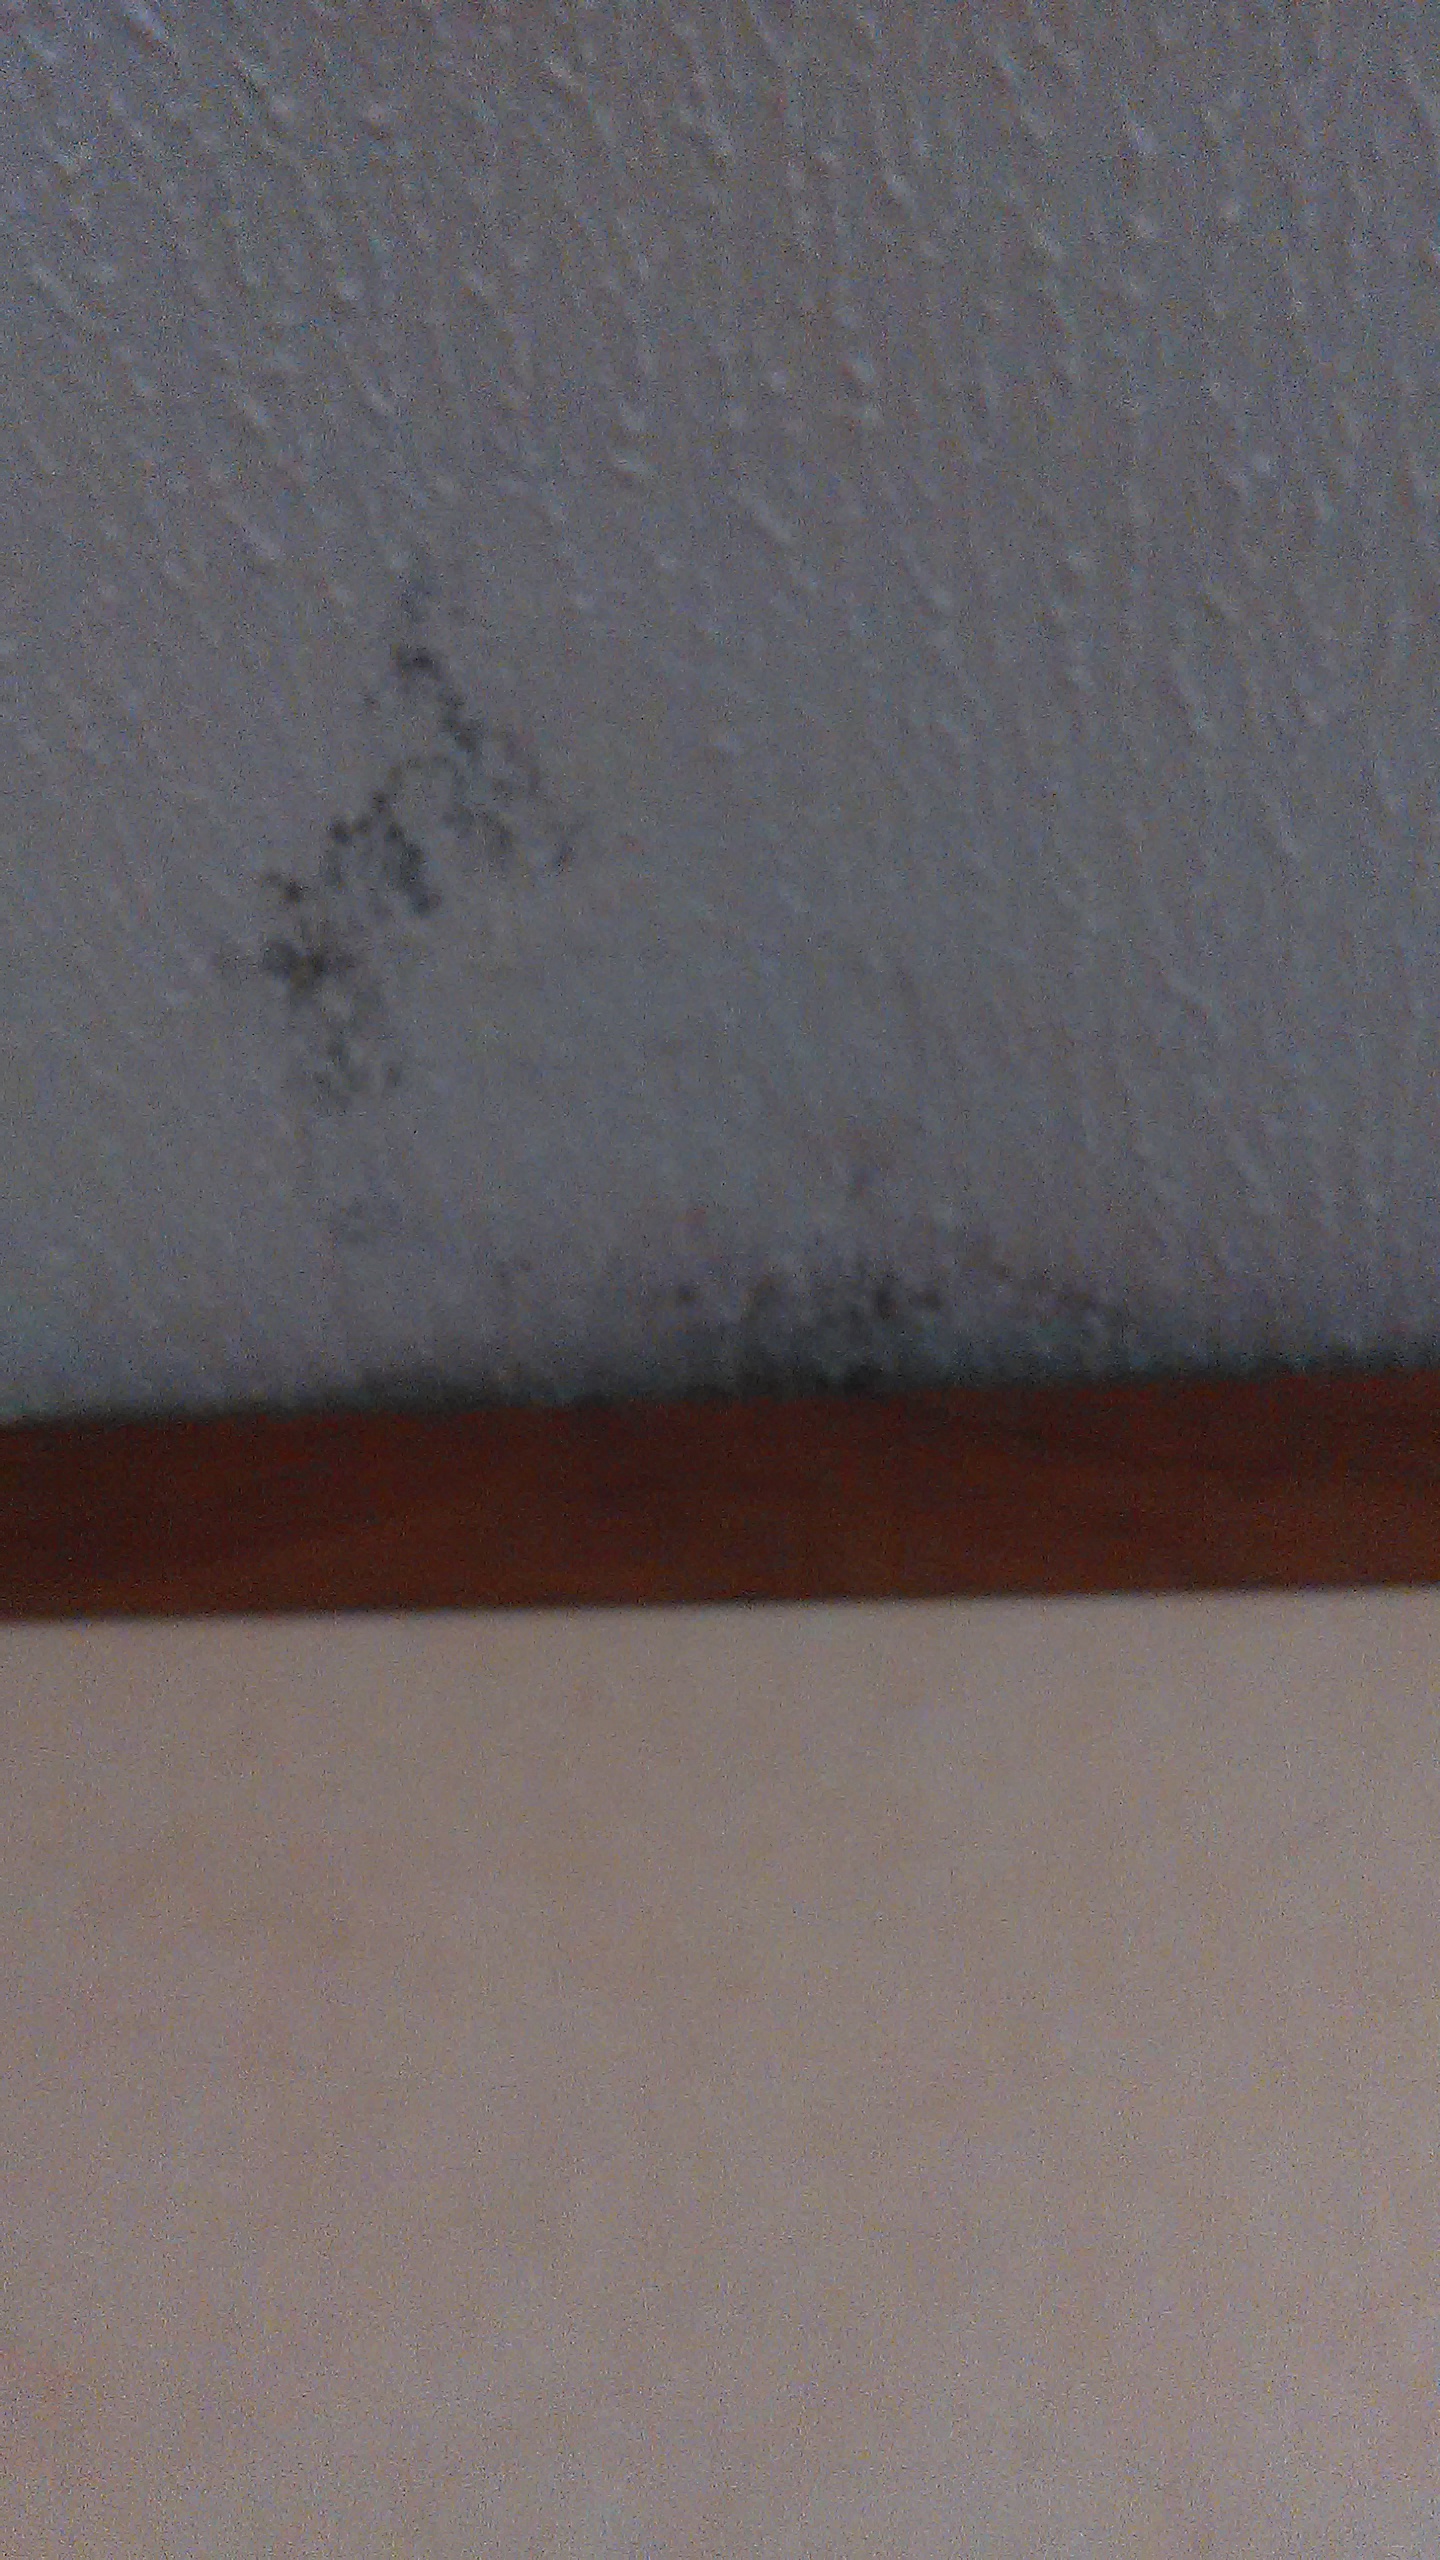 This is evidence of water damage from the outside of our home, leaking into the inside the bedroom ceiling and wall.   